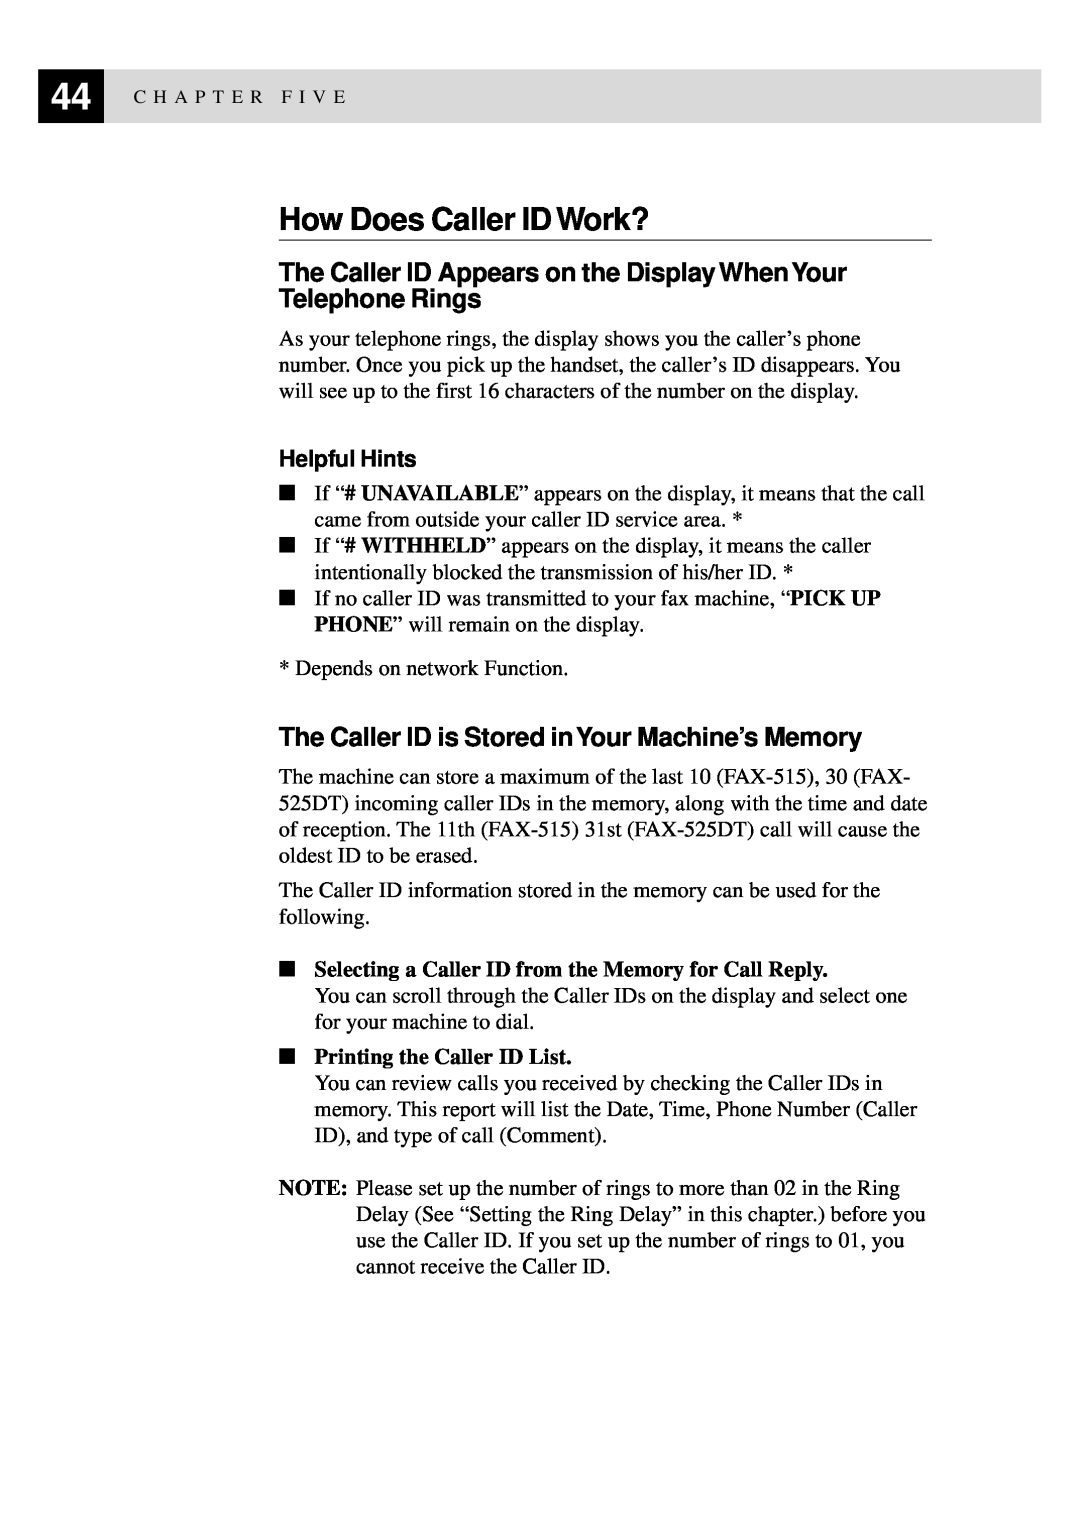 Brother 515 manual How Does Caller ID Work?, The Caller ID Appears on the Display When Your Telephone Rings, Helpful Hints 